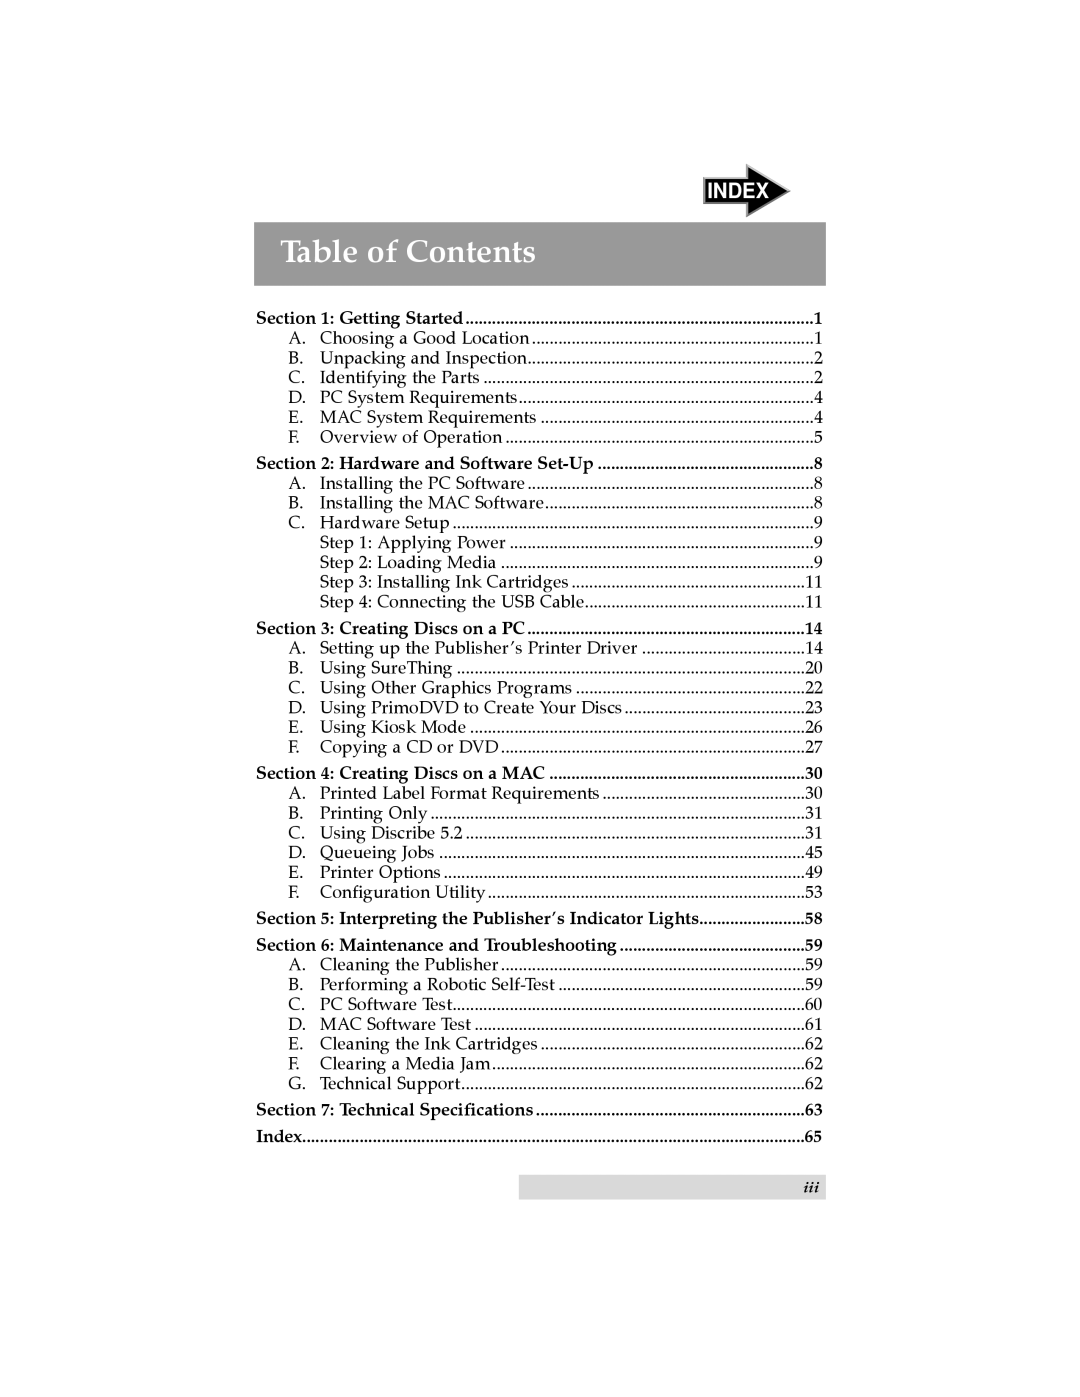 Primera Technology II user manual Table of Contents, Index 